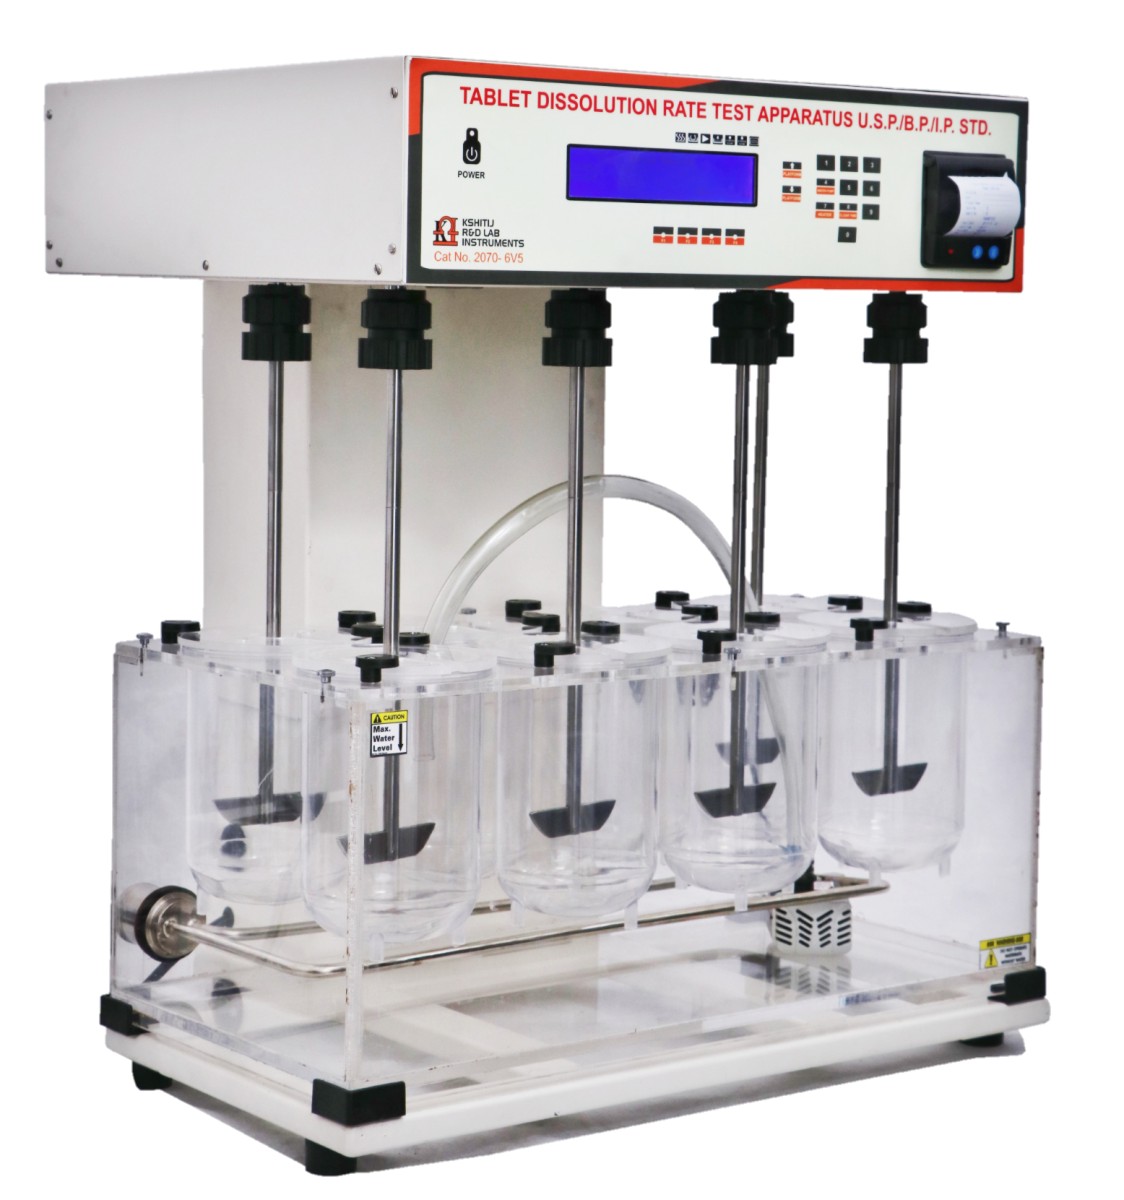 controller/assets/products_upload/Dissolution Rate Test Apparatus, Model No.: KI- 2070